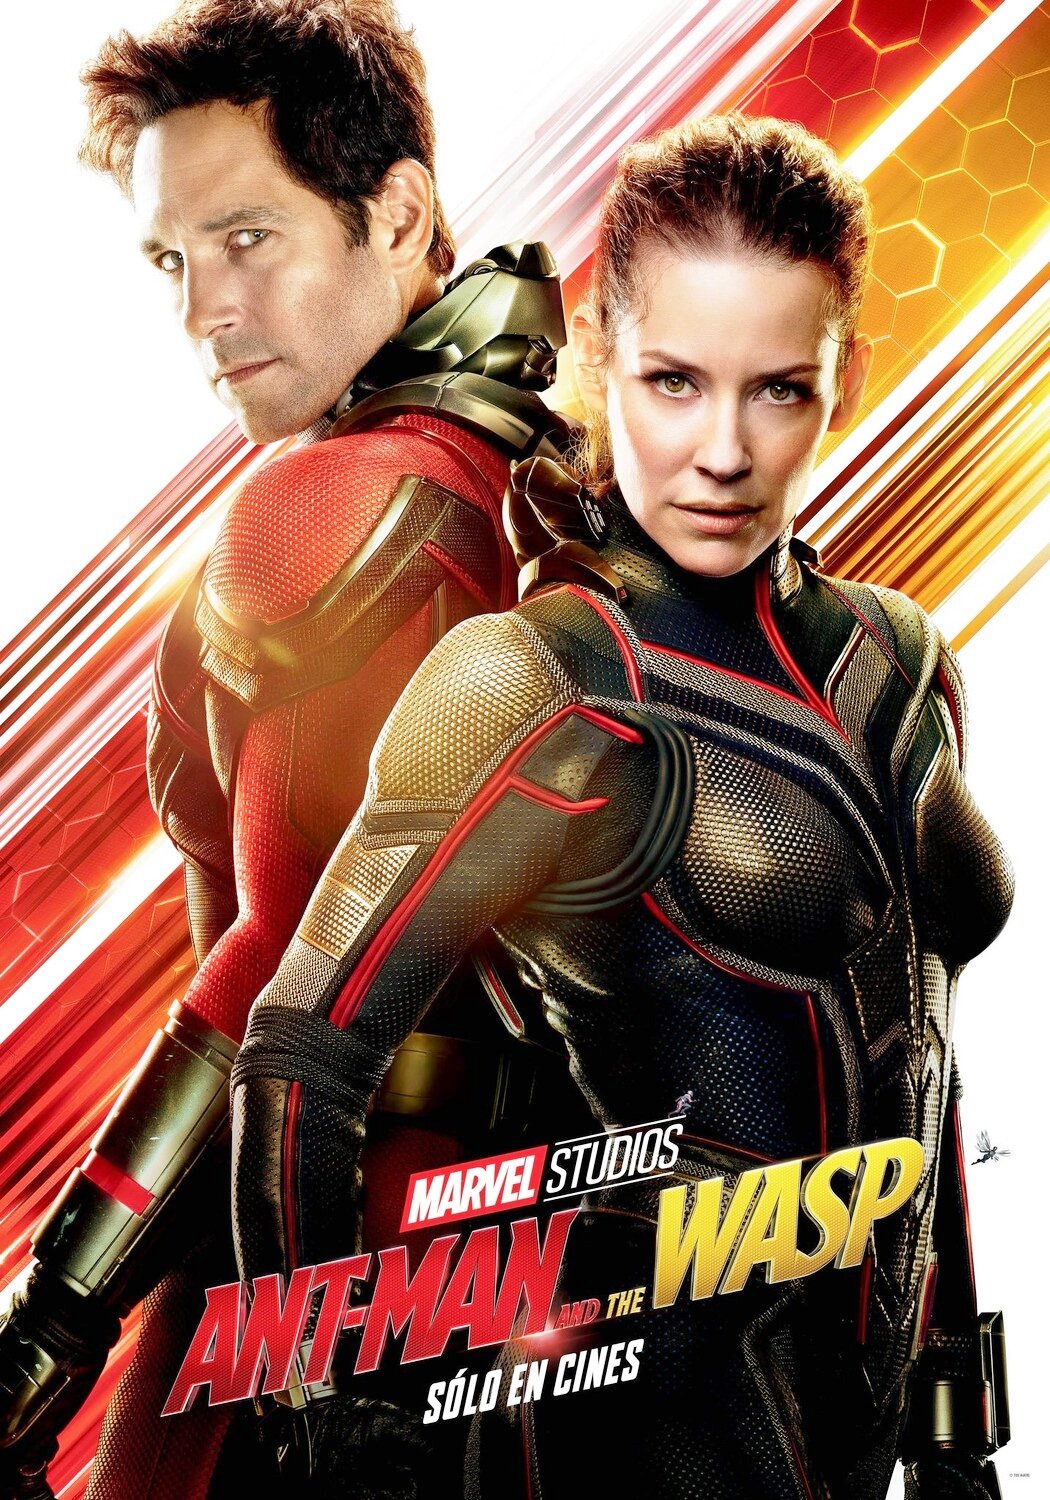 ant-man-and-the-wasp-nuovo-spot-tv-e-poster-internazionale-di-ant-man-2-2.jpg